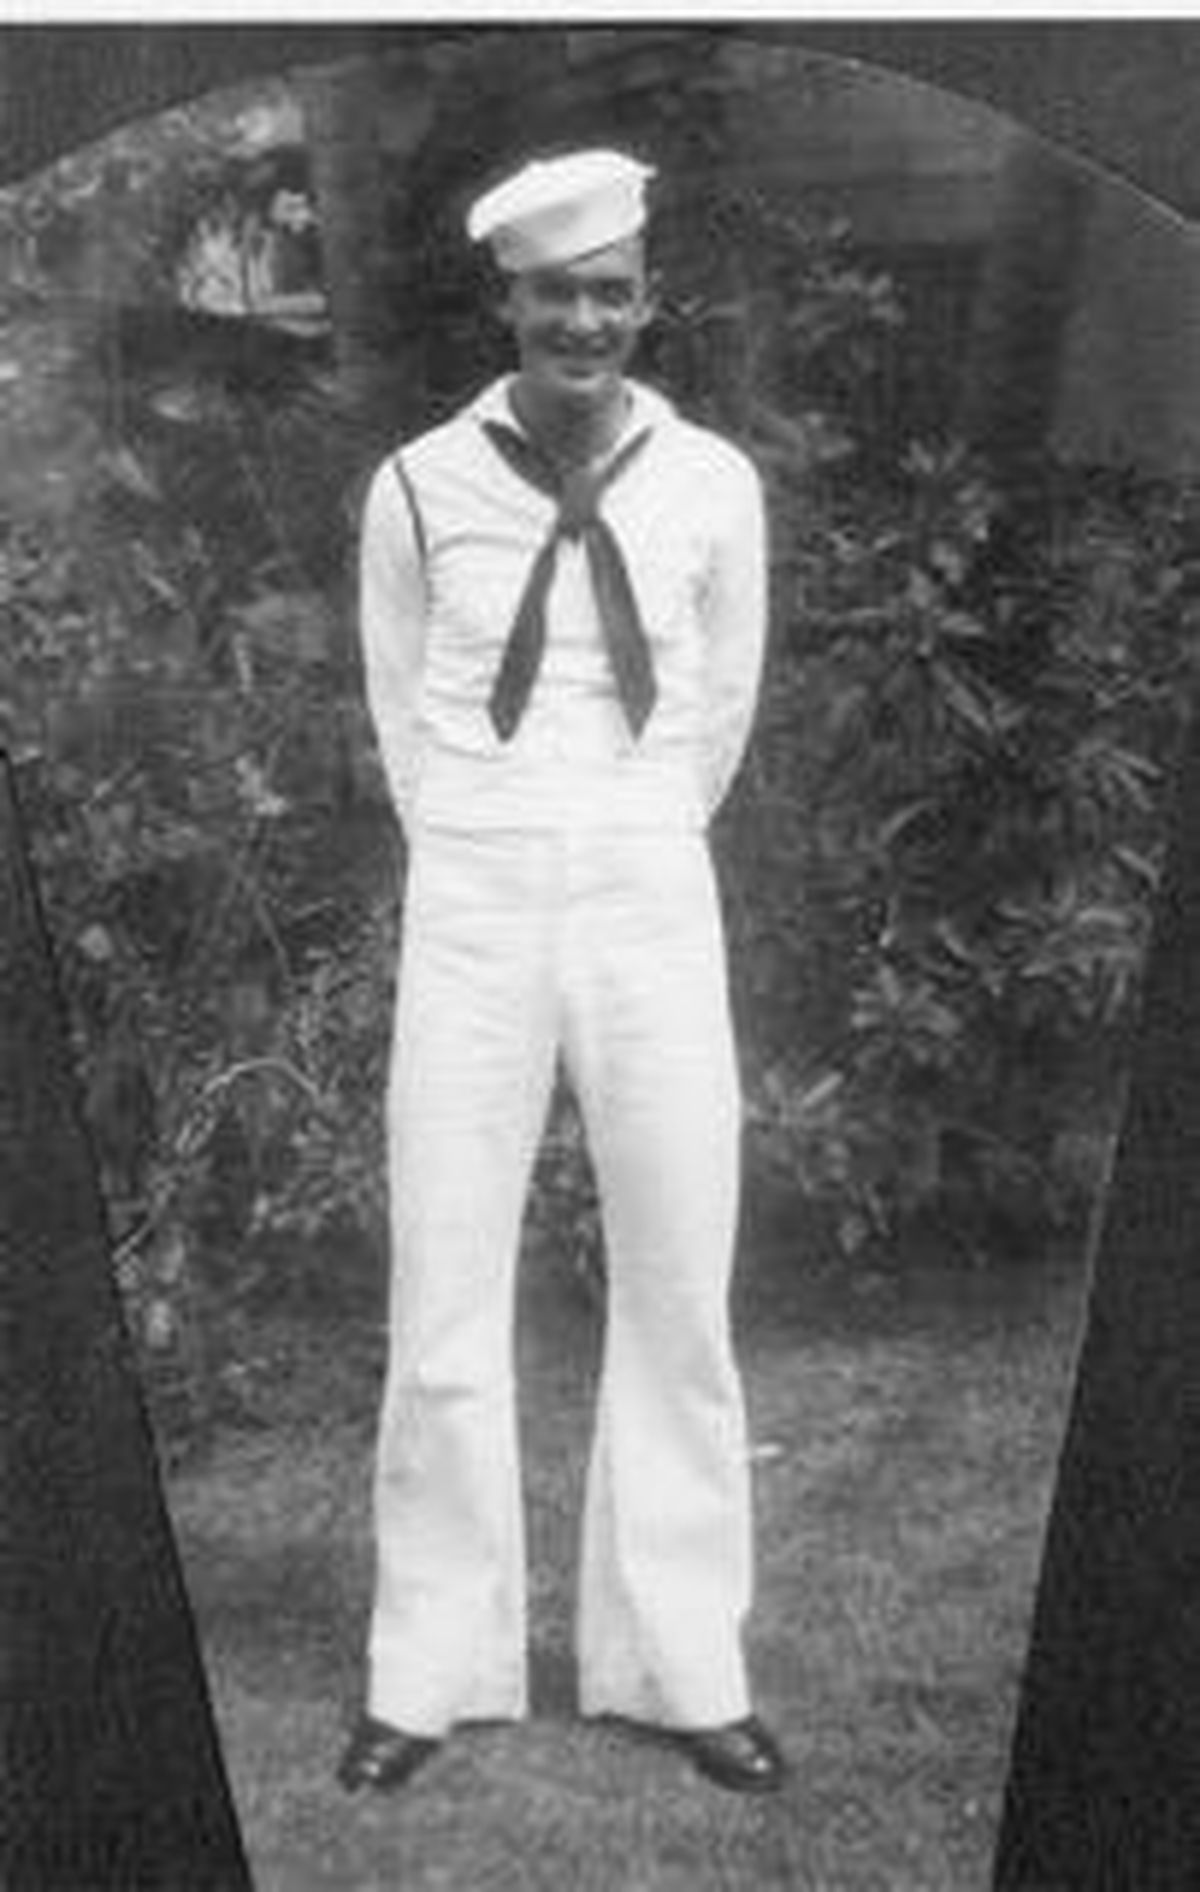 This photo provided by retired U.S. Navy Cmdr. Don Long shows Long in his Navy uniform in 1941. Long wasn’t at Pearl Harbor when Japanese warplanes bombed Hawaii on December 7, 1941 – he was on the opposite side of Oahu aboard an anchored seaplane in Kaneohe Bay. But the Japanese strike reached his installation soon after Pearl Harbor, and the young sailor watched from afar as explosions and gunfire consumed him and his comrades. Now, 77 years later, Long will remember that day from even farther away – across the Pacific at his home in Northern California. (Unknown / AP)